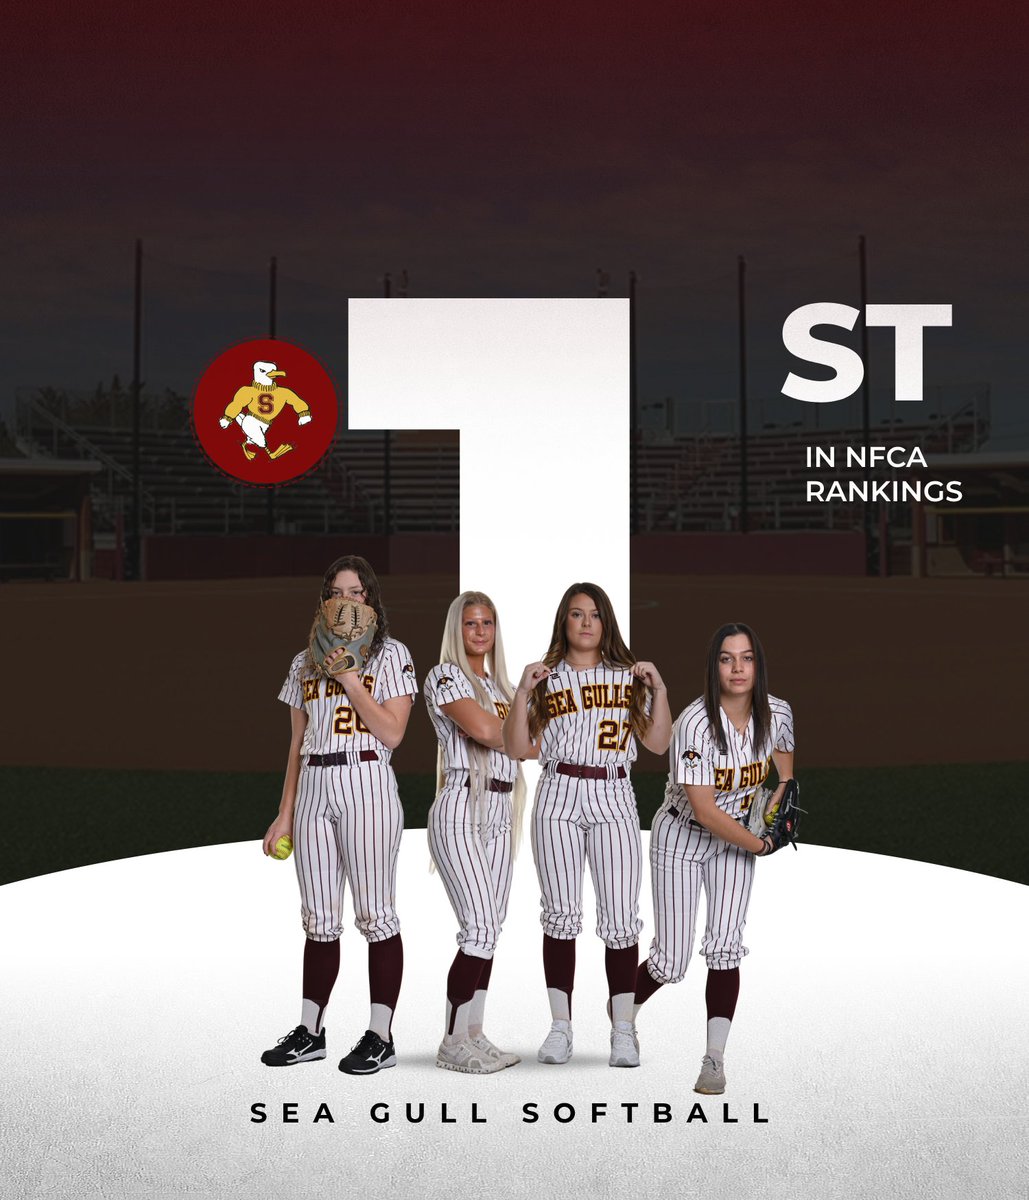 Back on top! Your SU Sea Gulls have jumped to 1st in the DIII rankings! #GoGulls